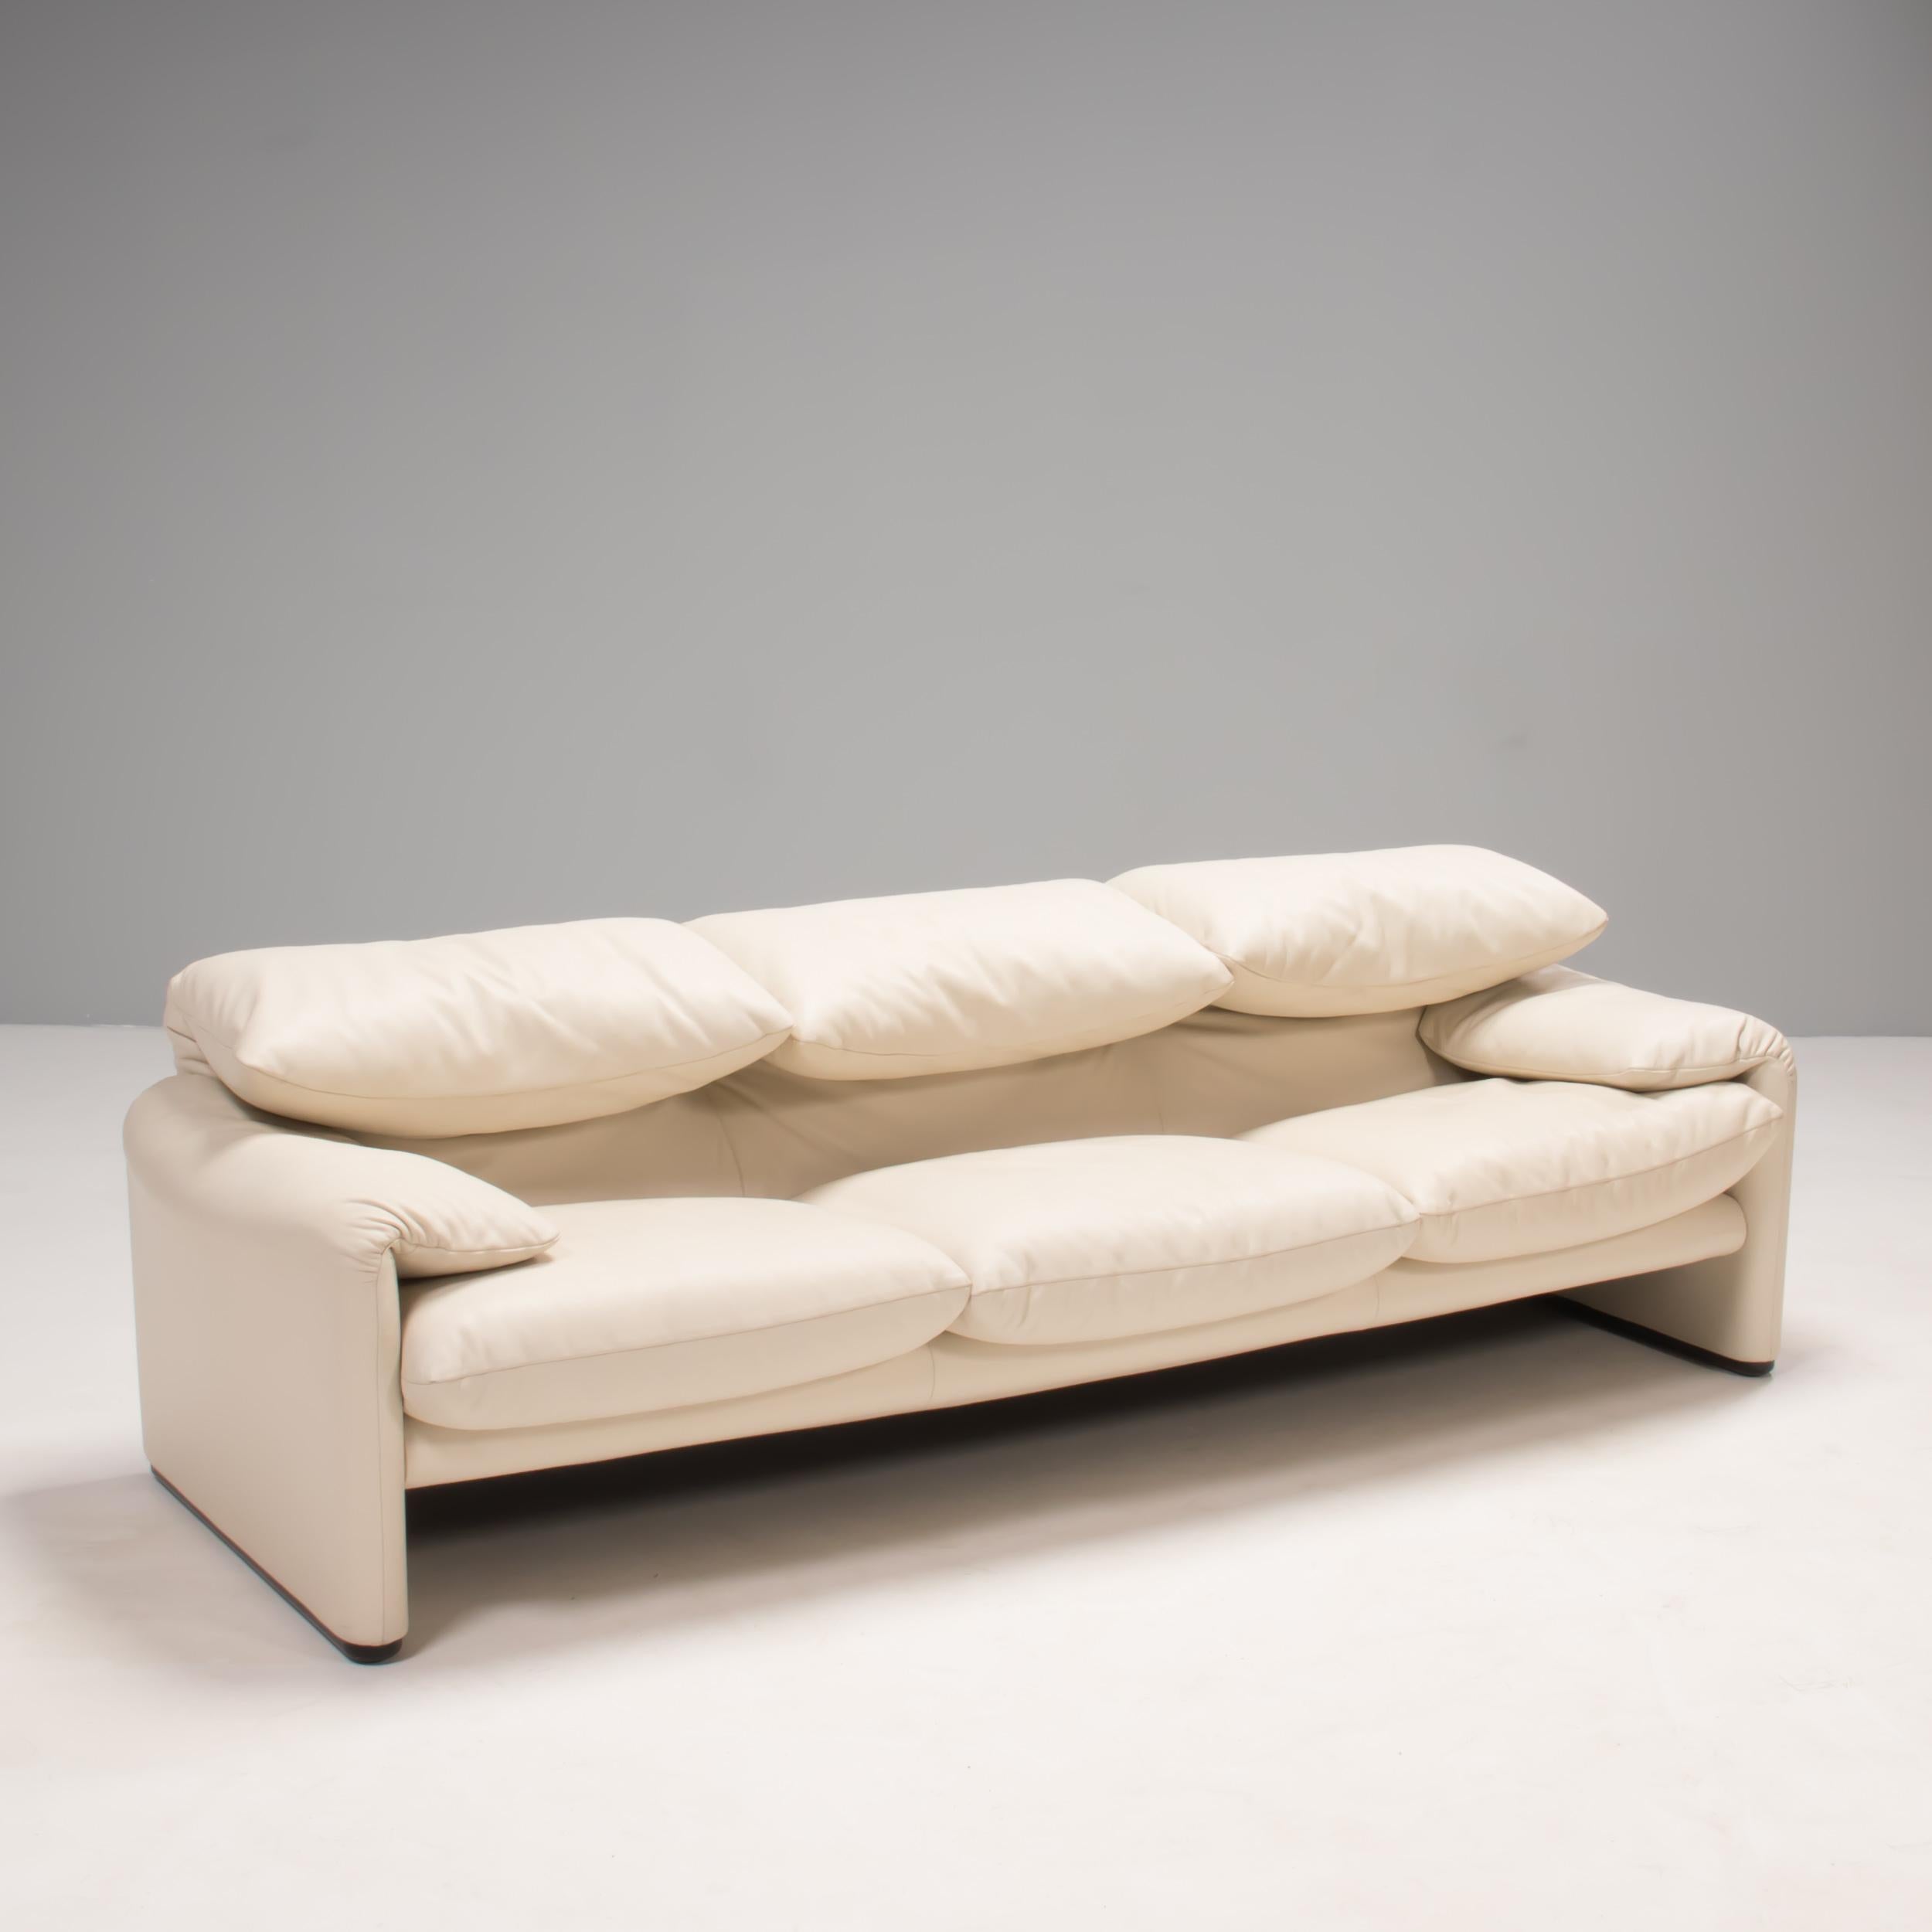 Originally designed by Vico Magistretti for Cassina in 1973, the Maralunga sofa has become a true design icon.

Upholstered in soft beige leather, the sofa features the signature adjustable headrests and folded armrests, while two separate seat